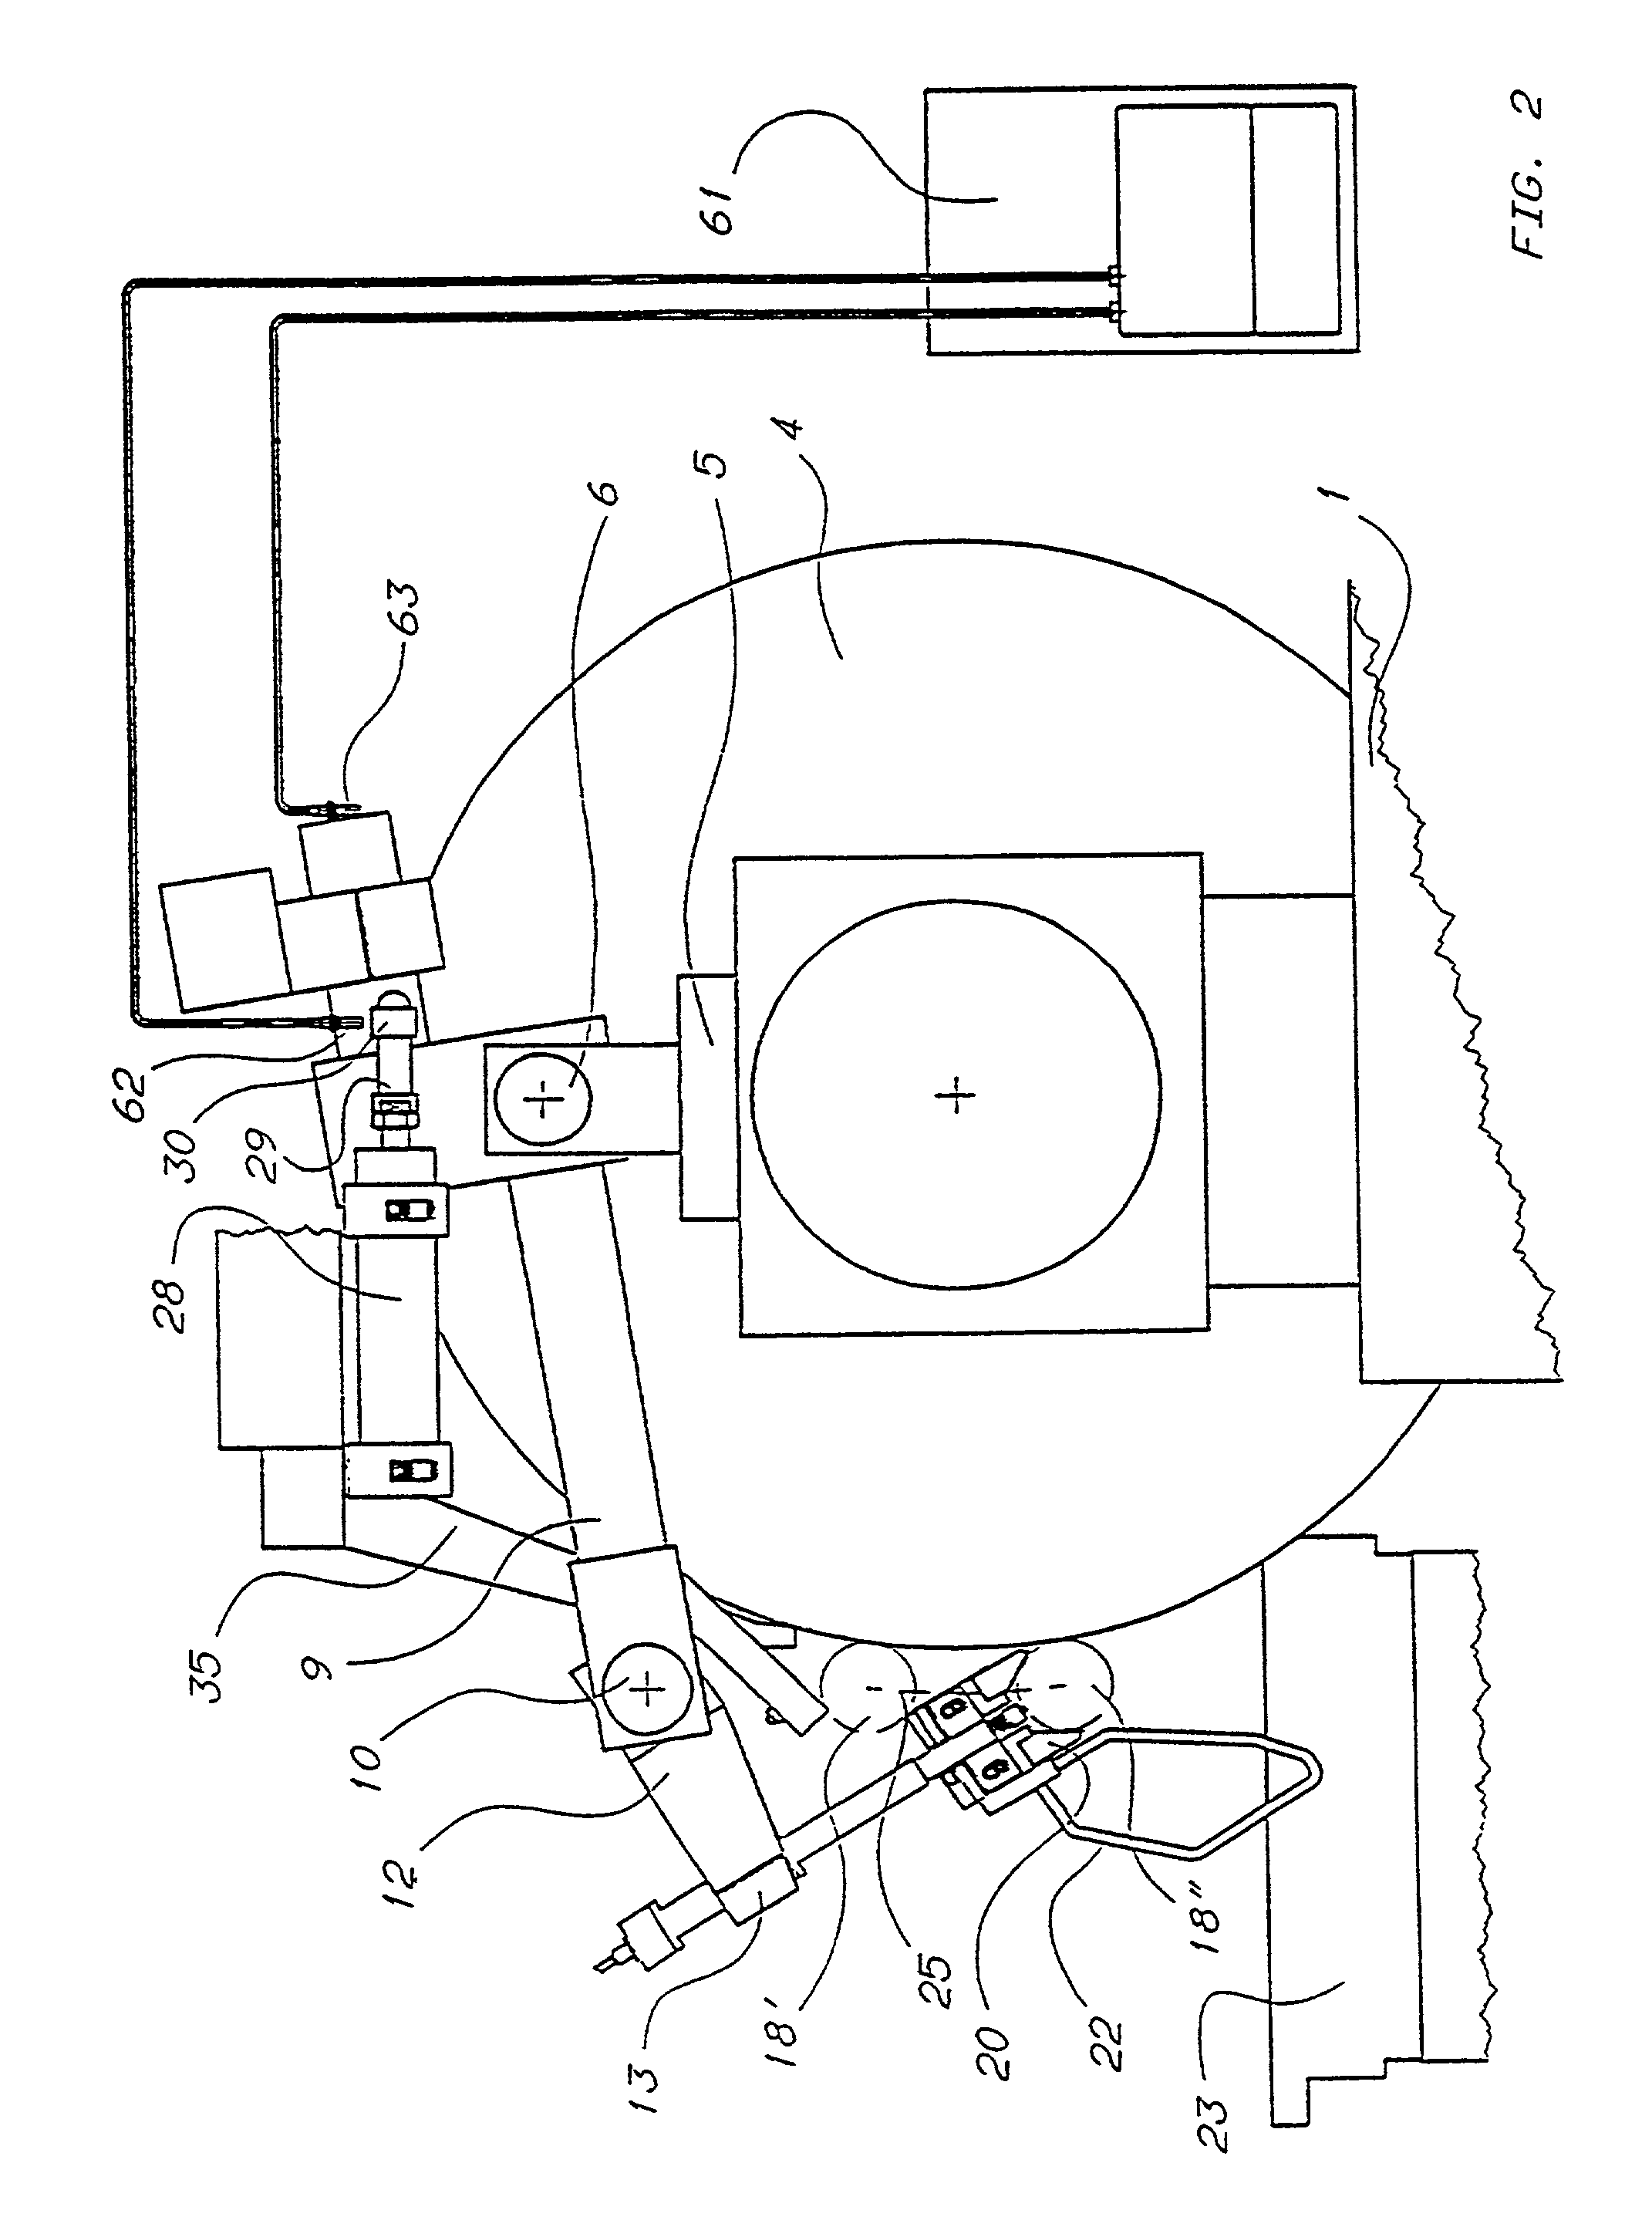 Apparatus for checking diametral dimensions of cylindrical parts rotating with an orbital motion